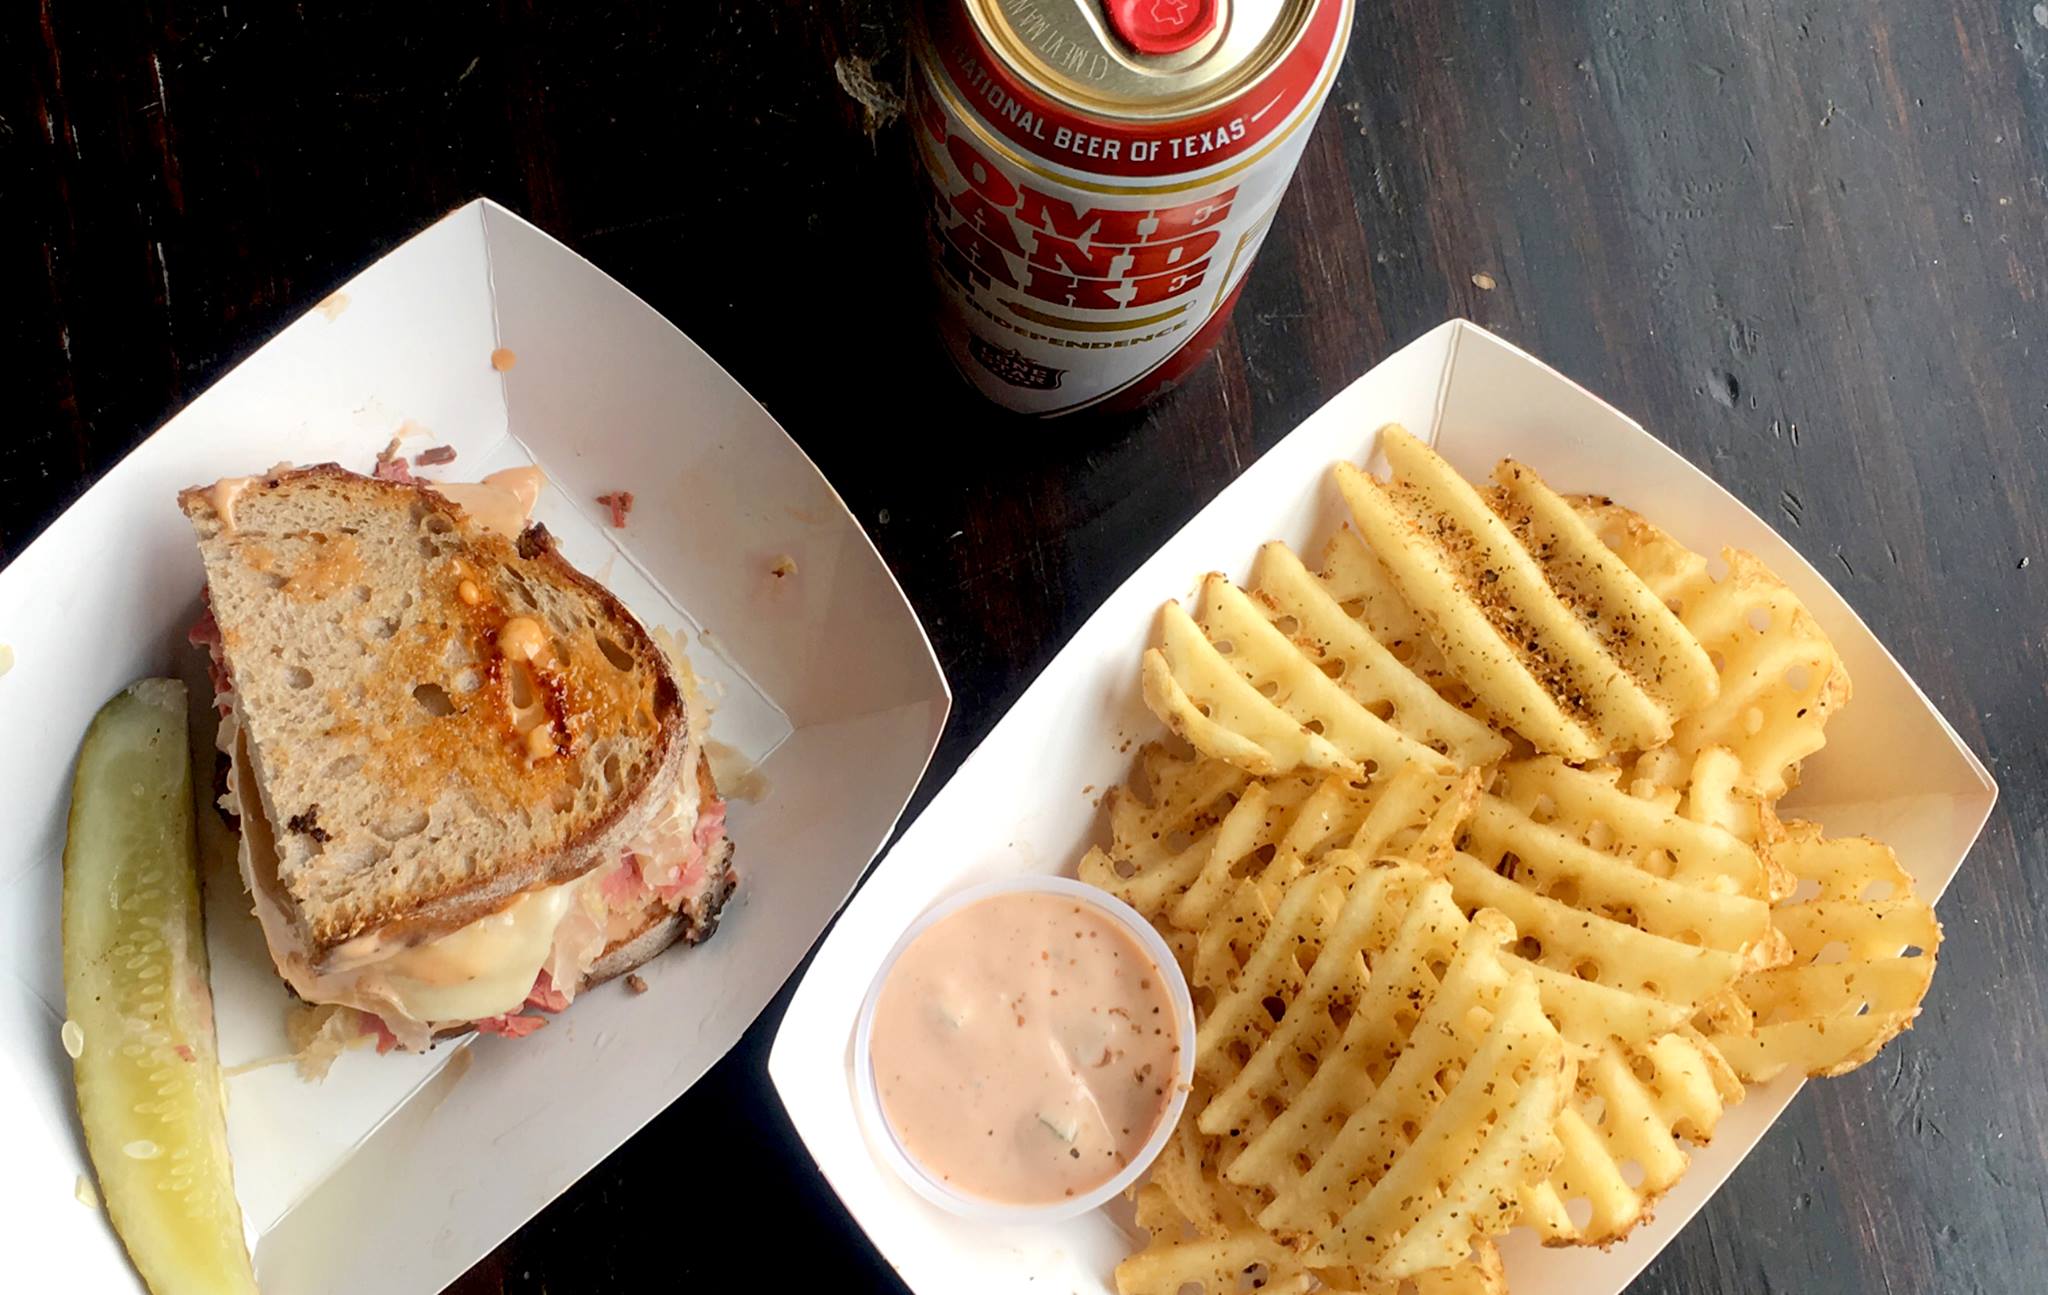 A sandwich and fries from Otherside Deli